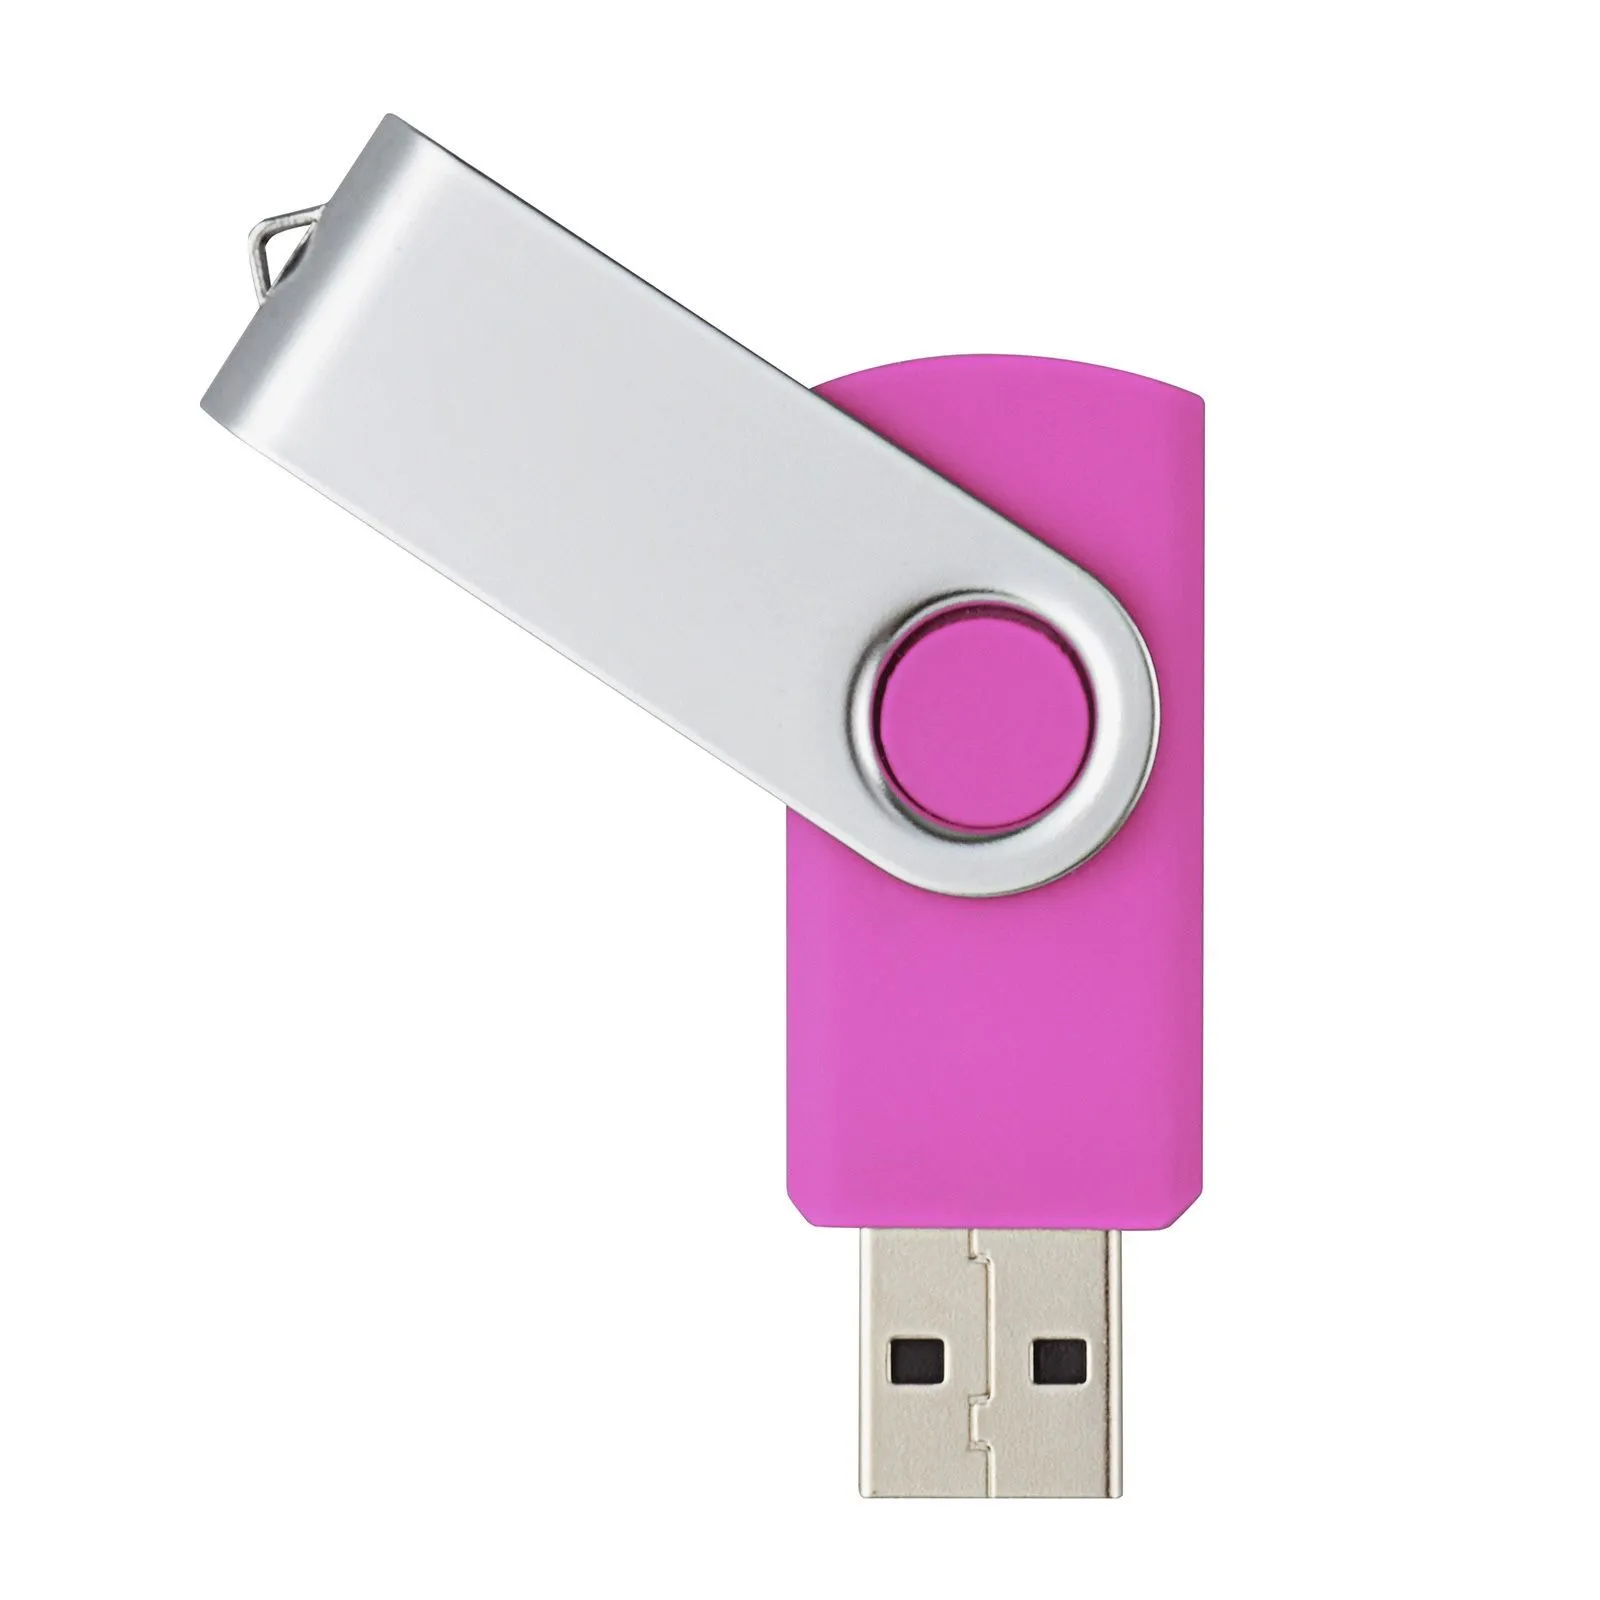 Usb Flash Drives Pink Metal Rotating 32Gb 2.0 Pen Drive Thumb Storage Enough Memory Stick For Pc Laptop Book Tablet Drop Delivery Comp